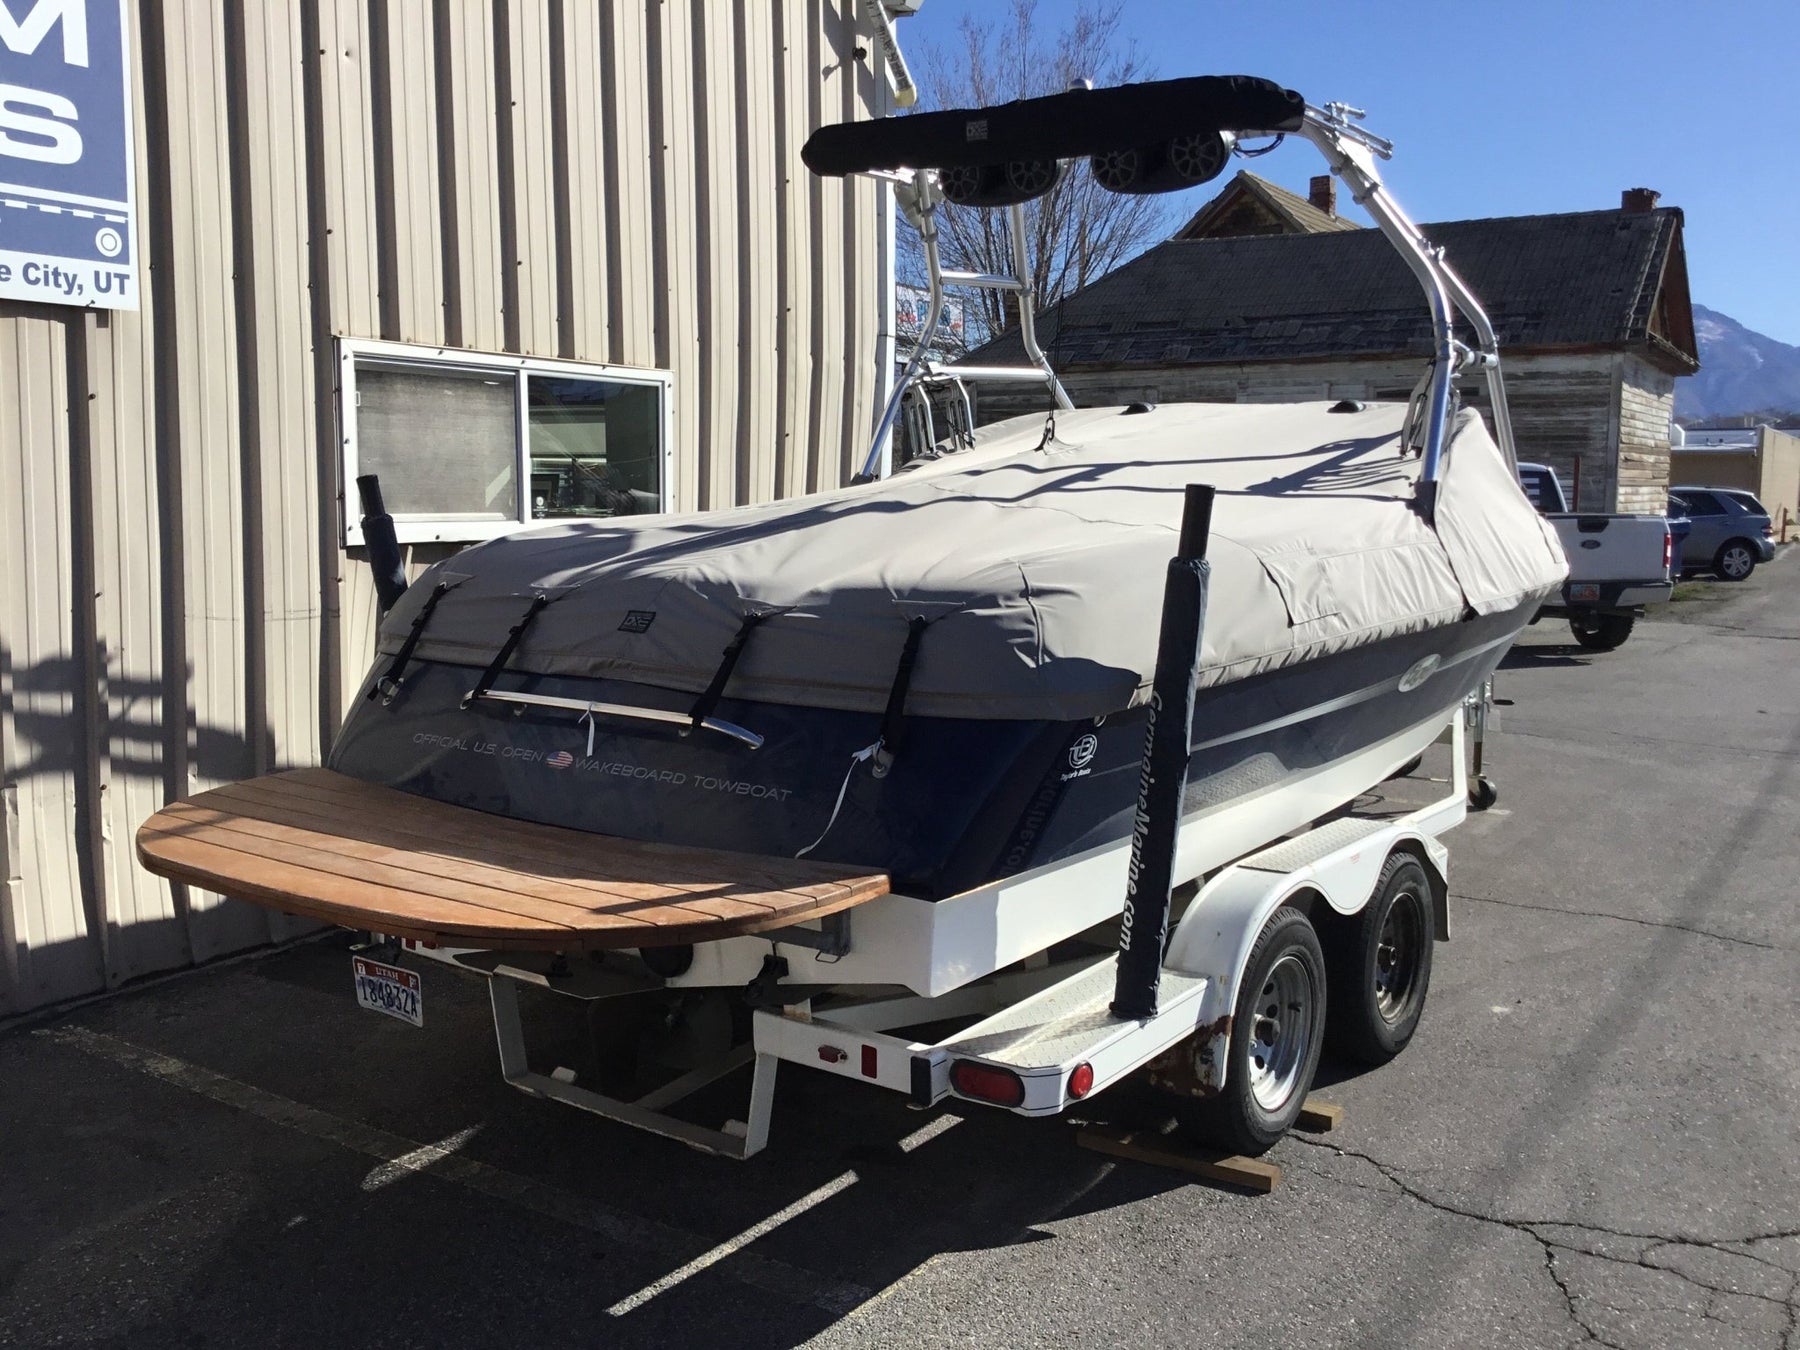 Tige 22V with Tubular Tower Cinch Cover - BoardCo